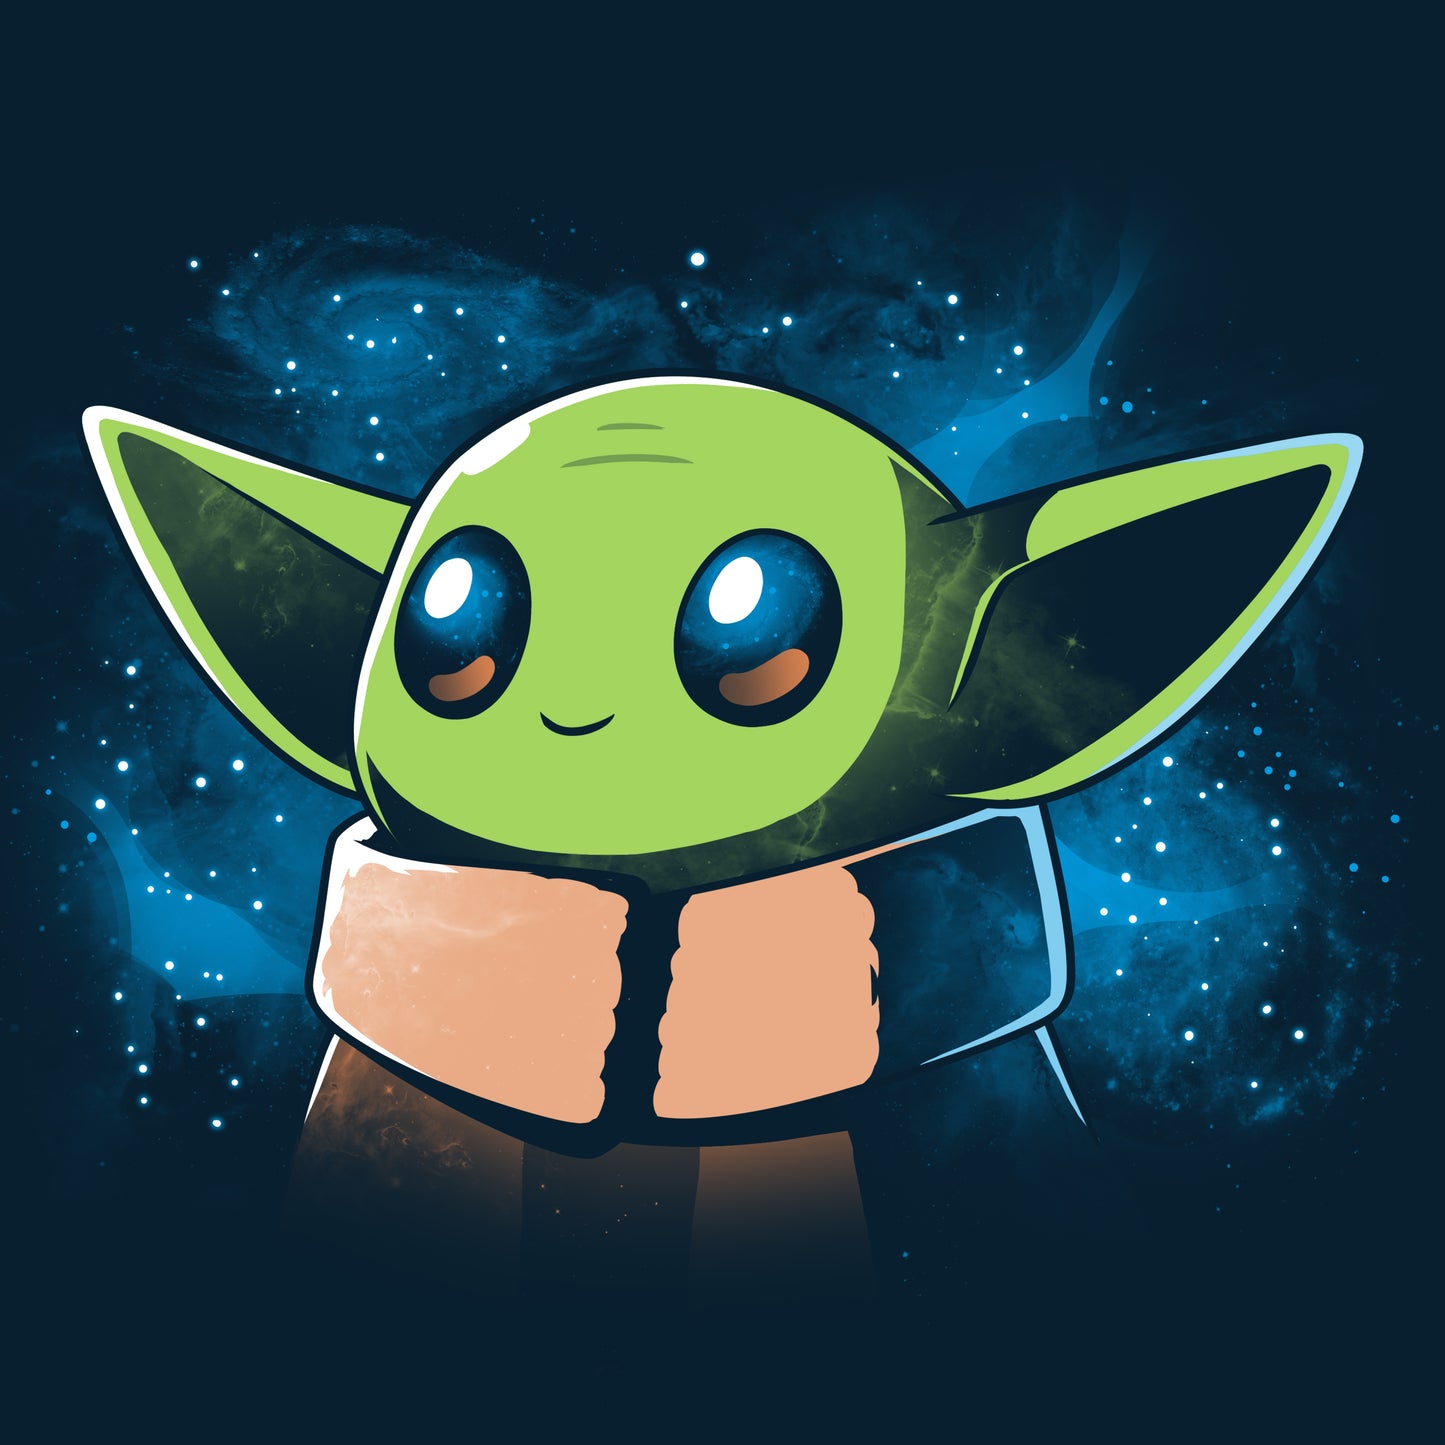 Officially licensed Star Wars T-shirt featuring The Child in Space, a green alien cartoon.